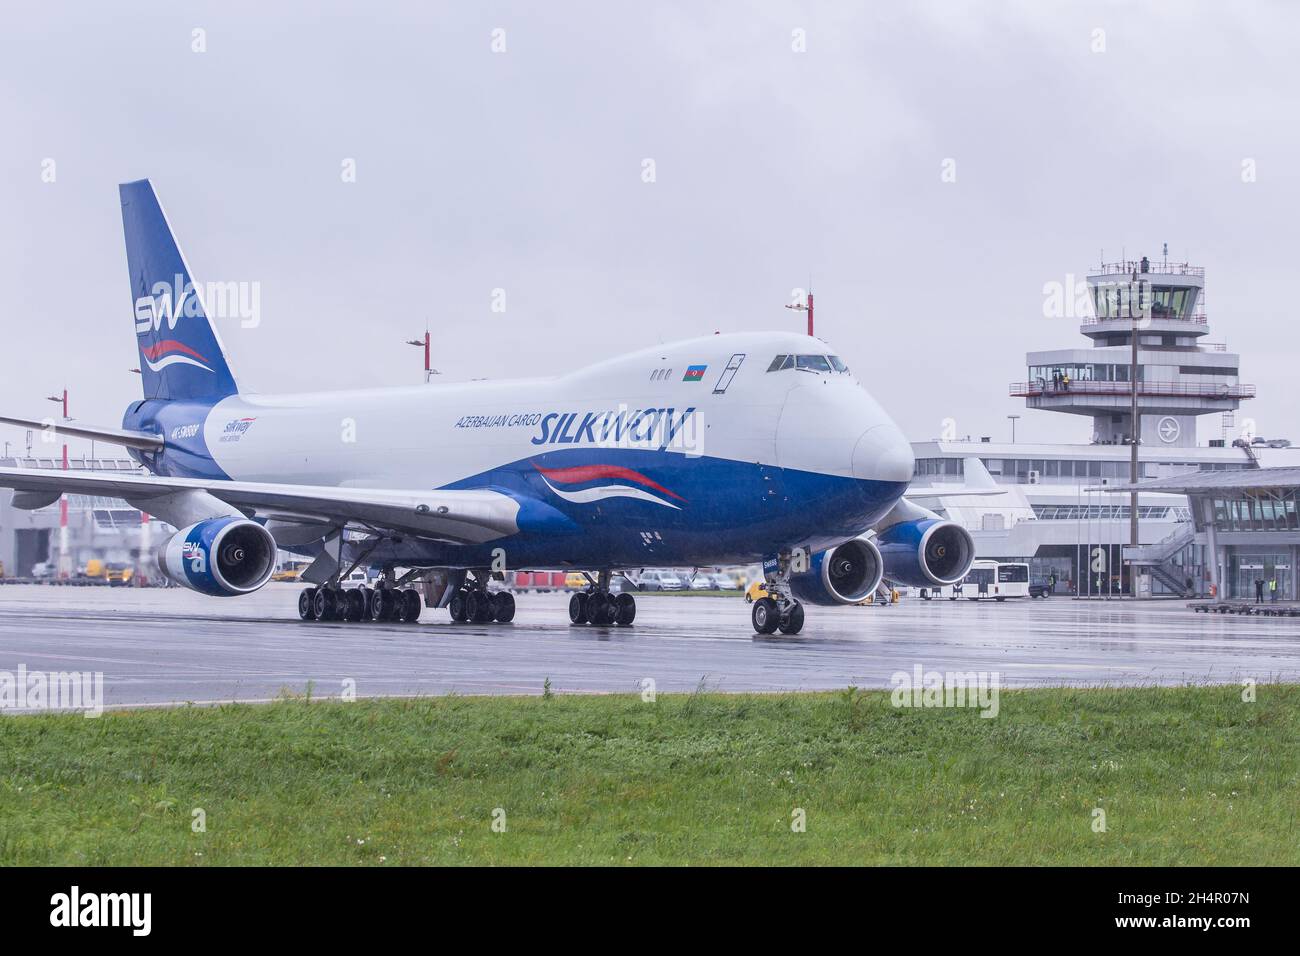 LINZ, AUSTRIA - Oct 10, 2021: Silkway Azerbaijan Cargo Airlines Boeing 747-400F freighter on the apron at Linz airport Stock Photo